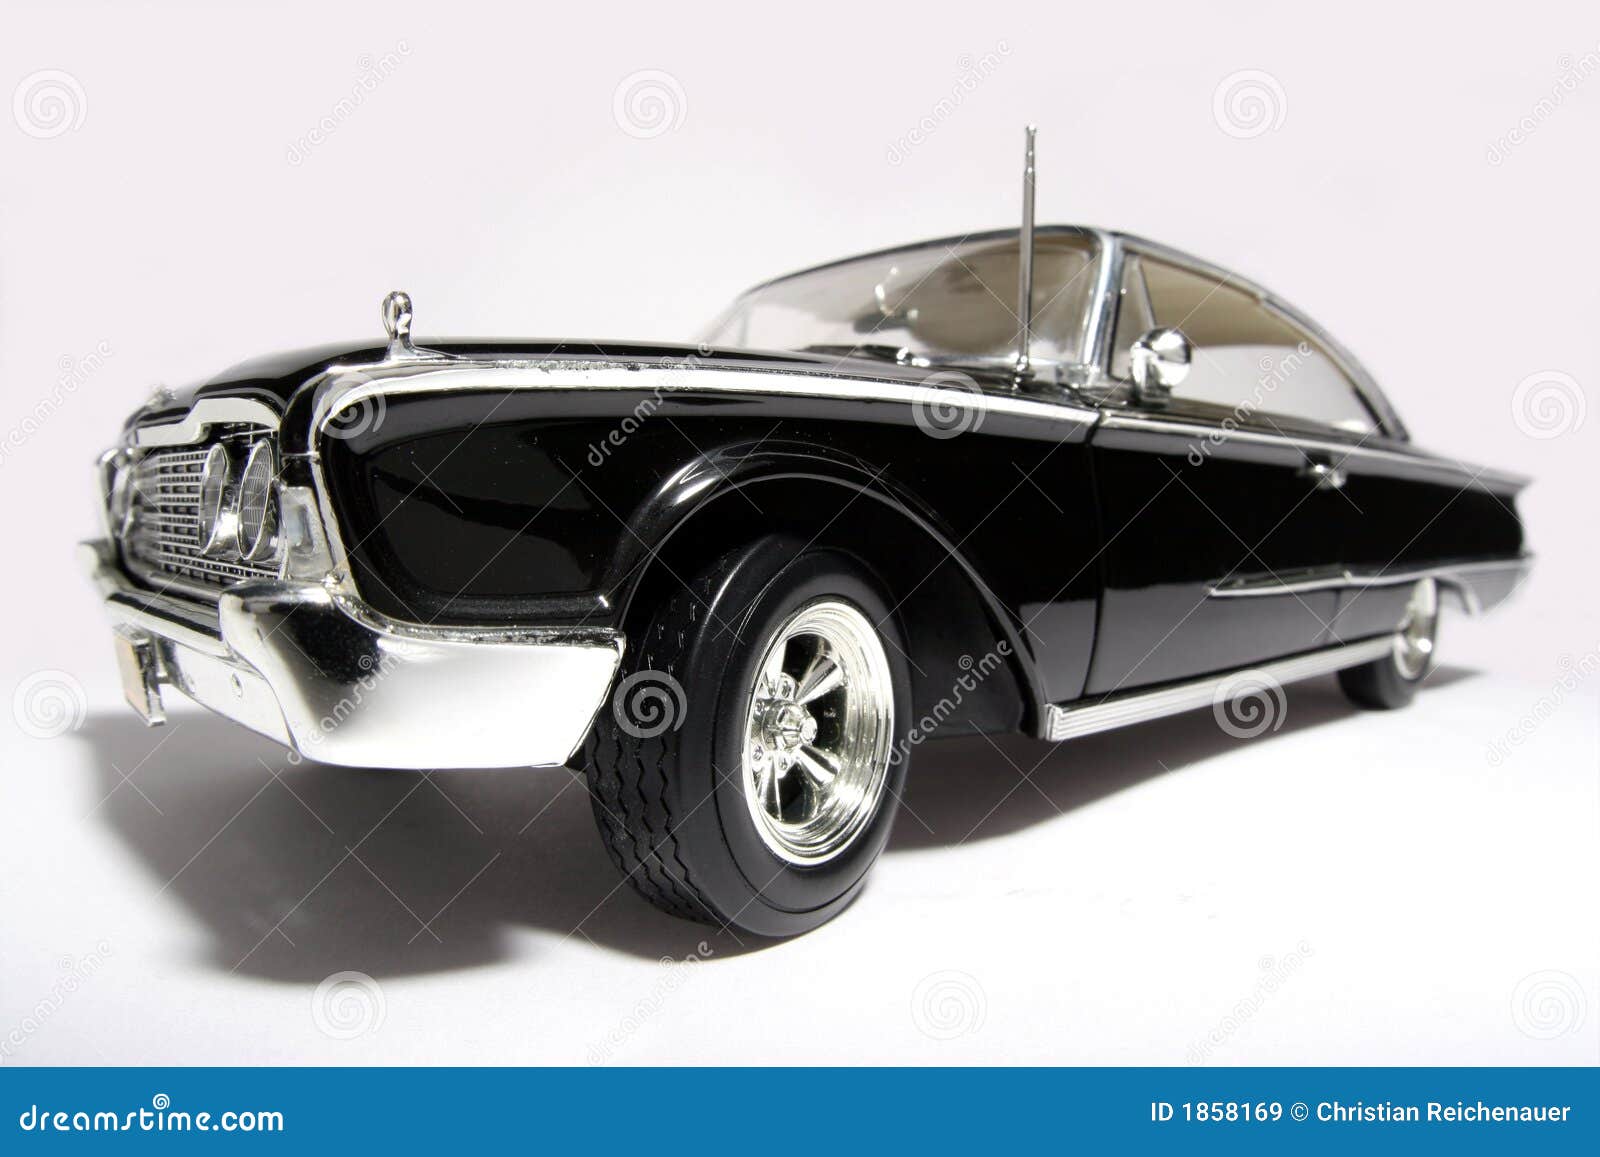 1960 Ford Starliner Metal Scale Toy Car Fisheye 2 Stock Image Image Of Collection Starliner 1858169